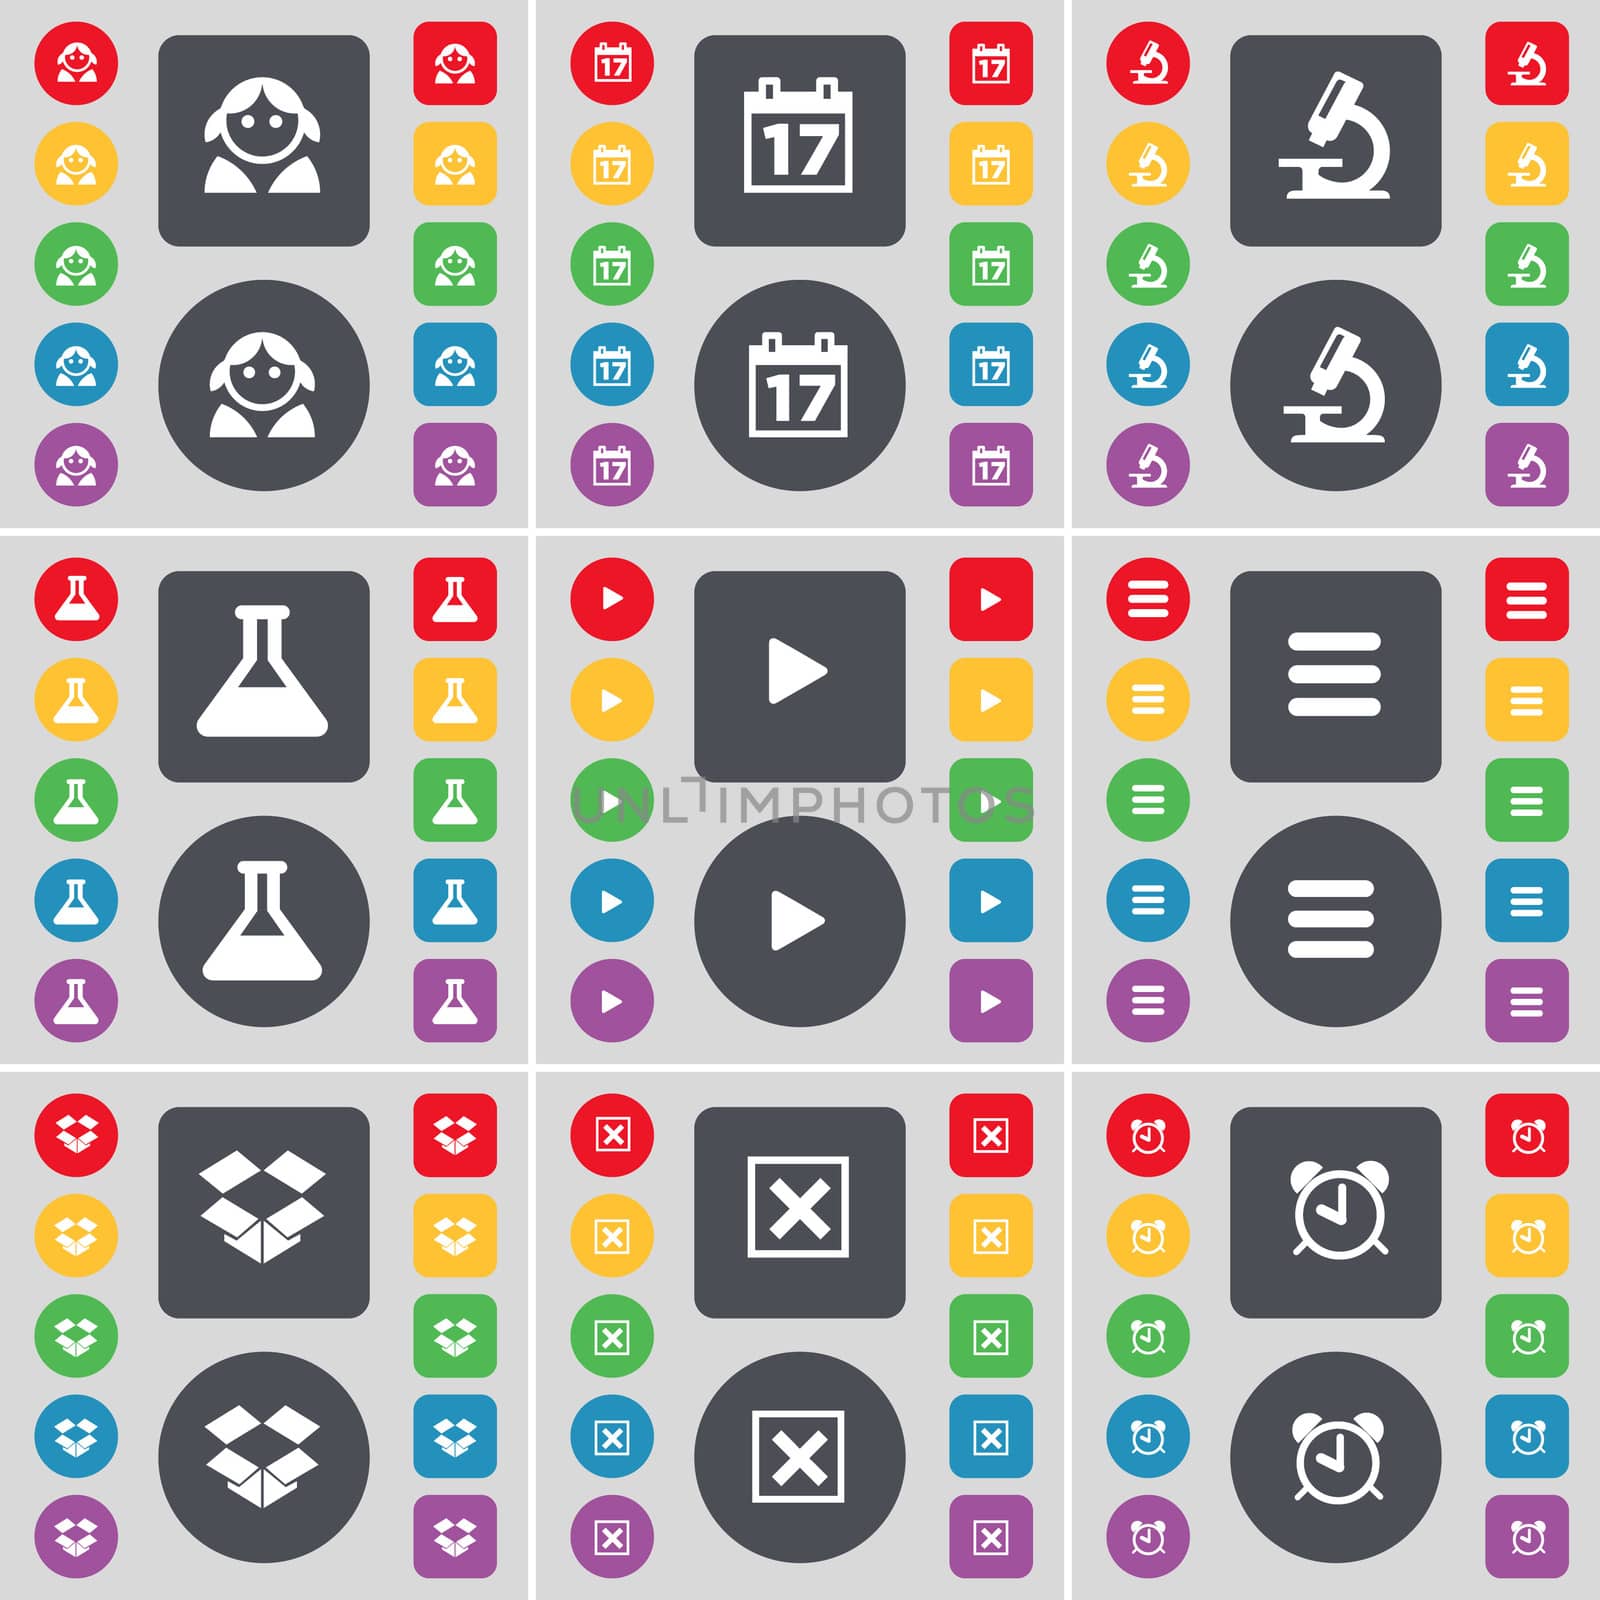 Avatar, Calendar, Microscope, Flask, Media play, Apps, Dropbox, Stop, Alarm clock icon symbol. A large set of flat, colored buttons for your design.  by serhii_lohvyniuk